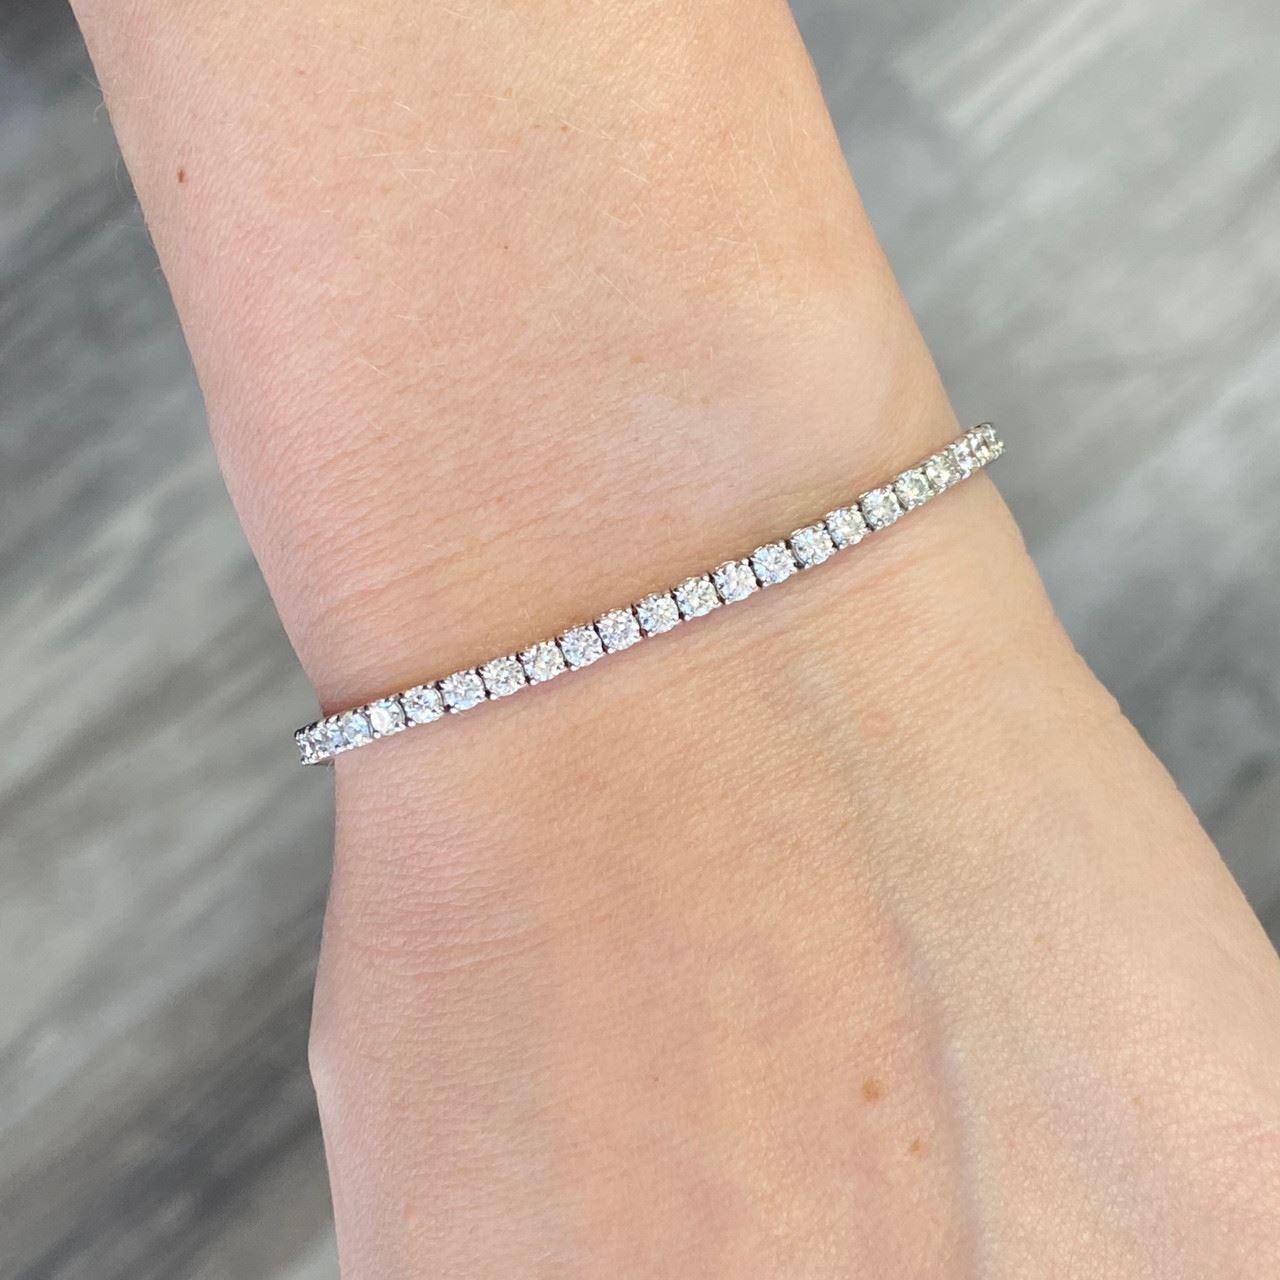 Contemporary 14k White Gold Diamond Tennis Bracelet Weighing 3.93ctw For Sale